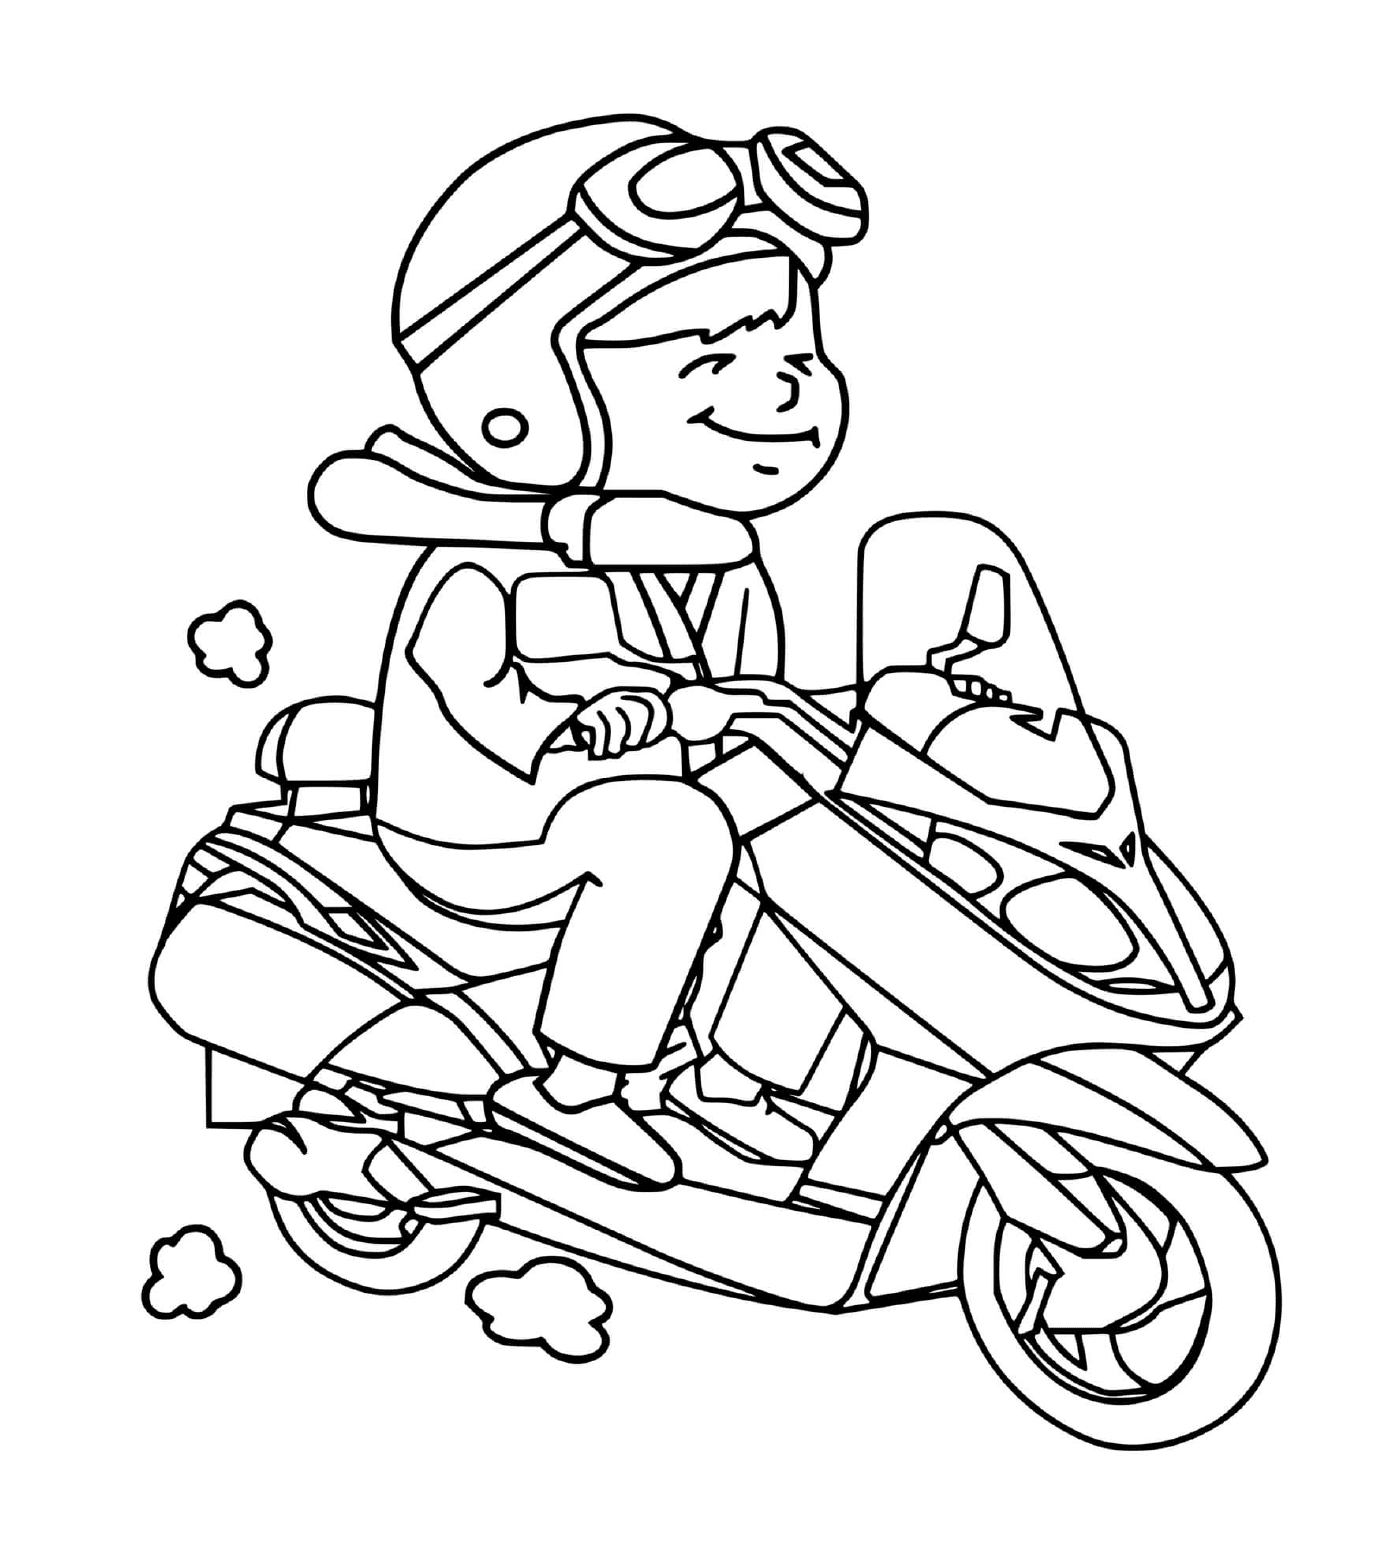  Child with his scooter motorbike 